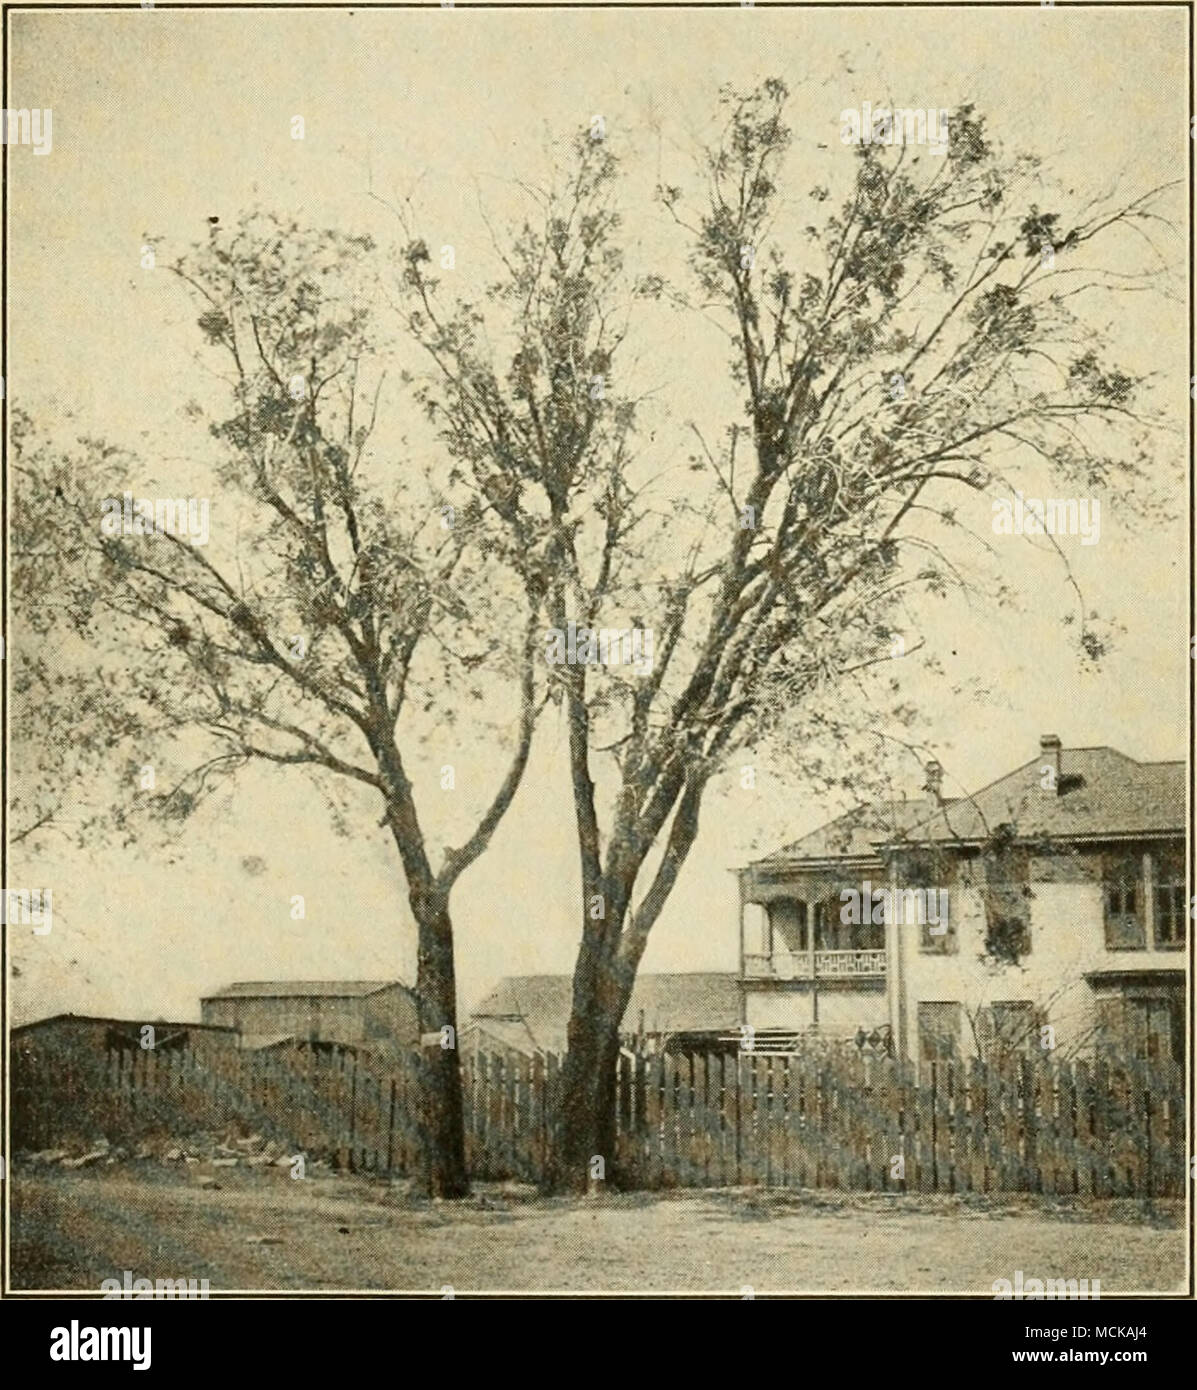 . Fig. 197. — Trees infesteci with mistletoe. Courtesy of the School of Botany of the University of Texas. in lawns and parks. They usually attack the smaller branches of the trees, and thus cut off the nourishment from their tips and eventually cause these portions to die. The general effect is to spoil the beauty of the tree. On forest trees they cause small diameters, reduced height, and scraggy crowns. Stock Photo